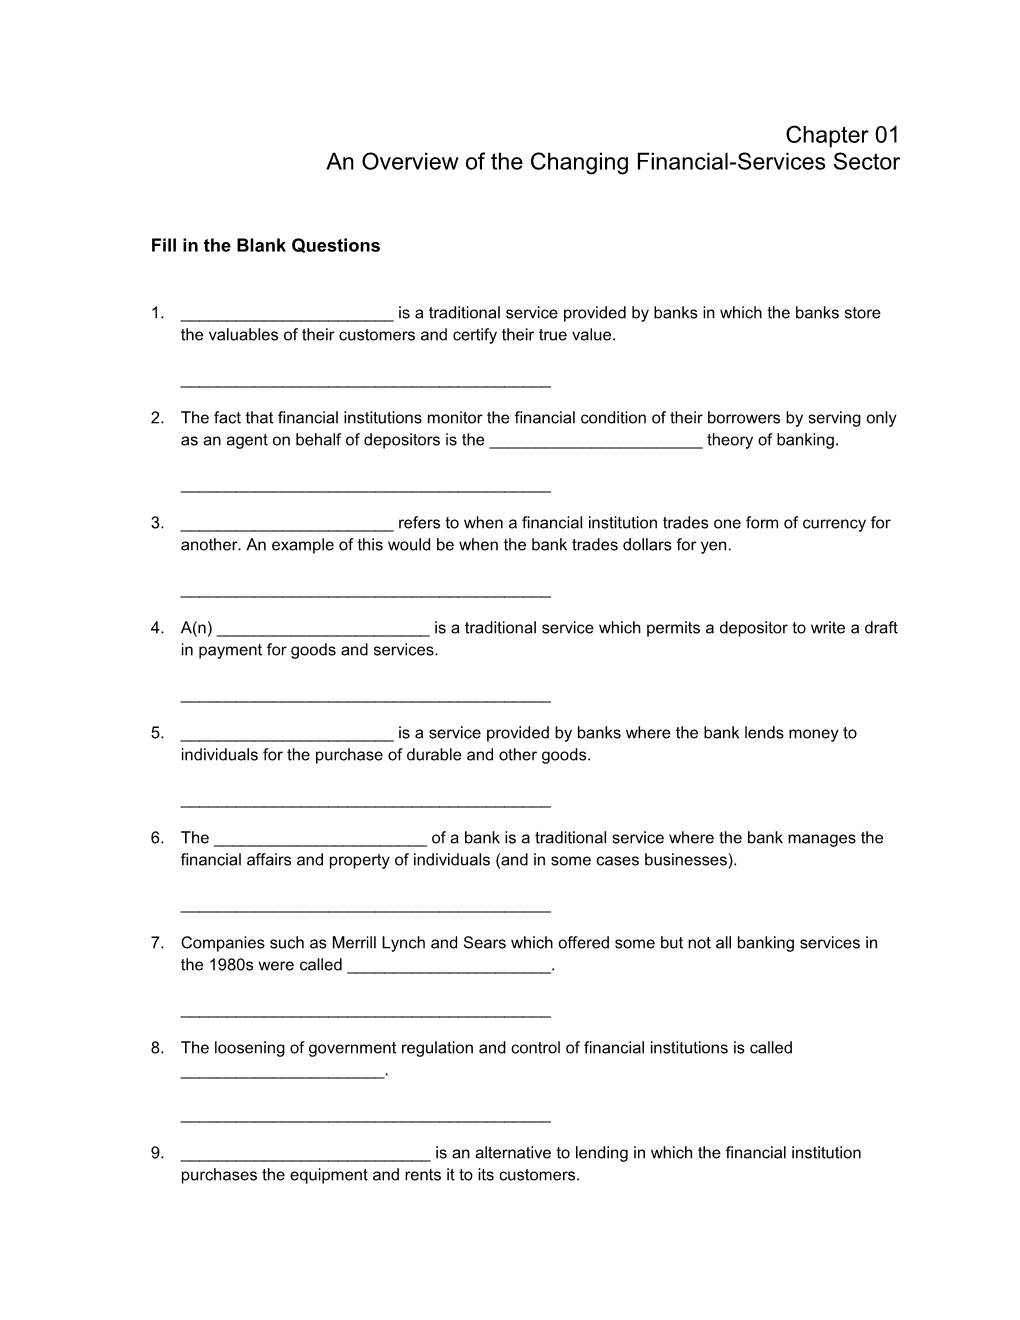 An Overview of the Changing Financial-Services Sector